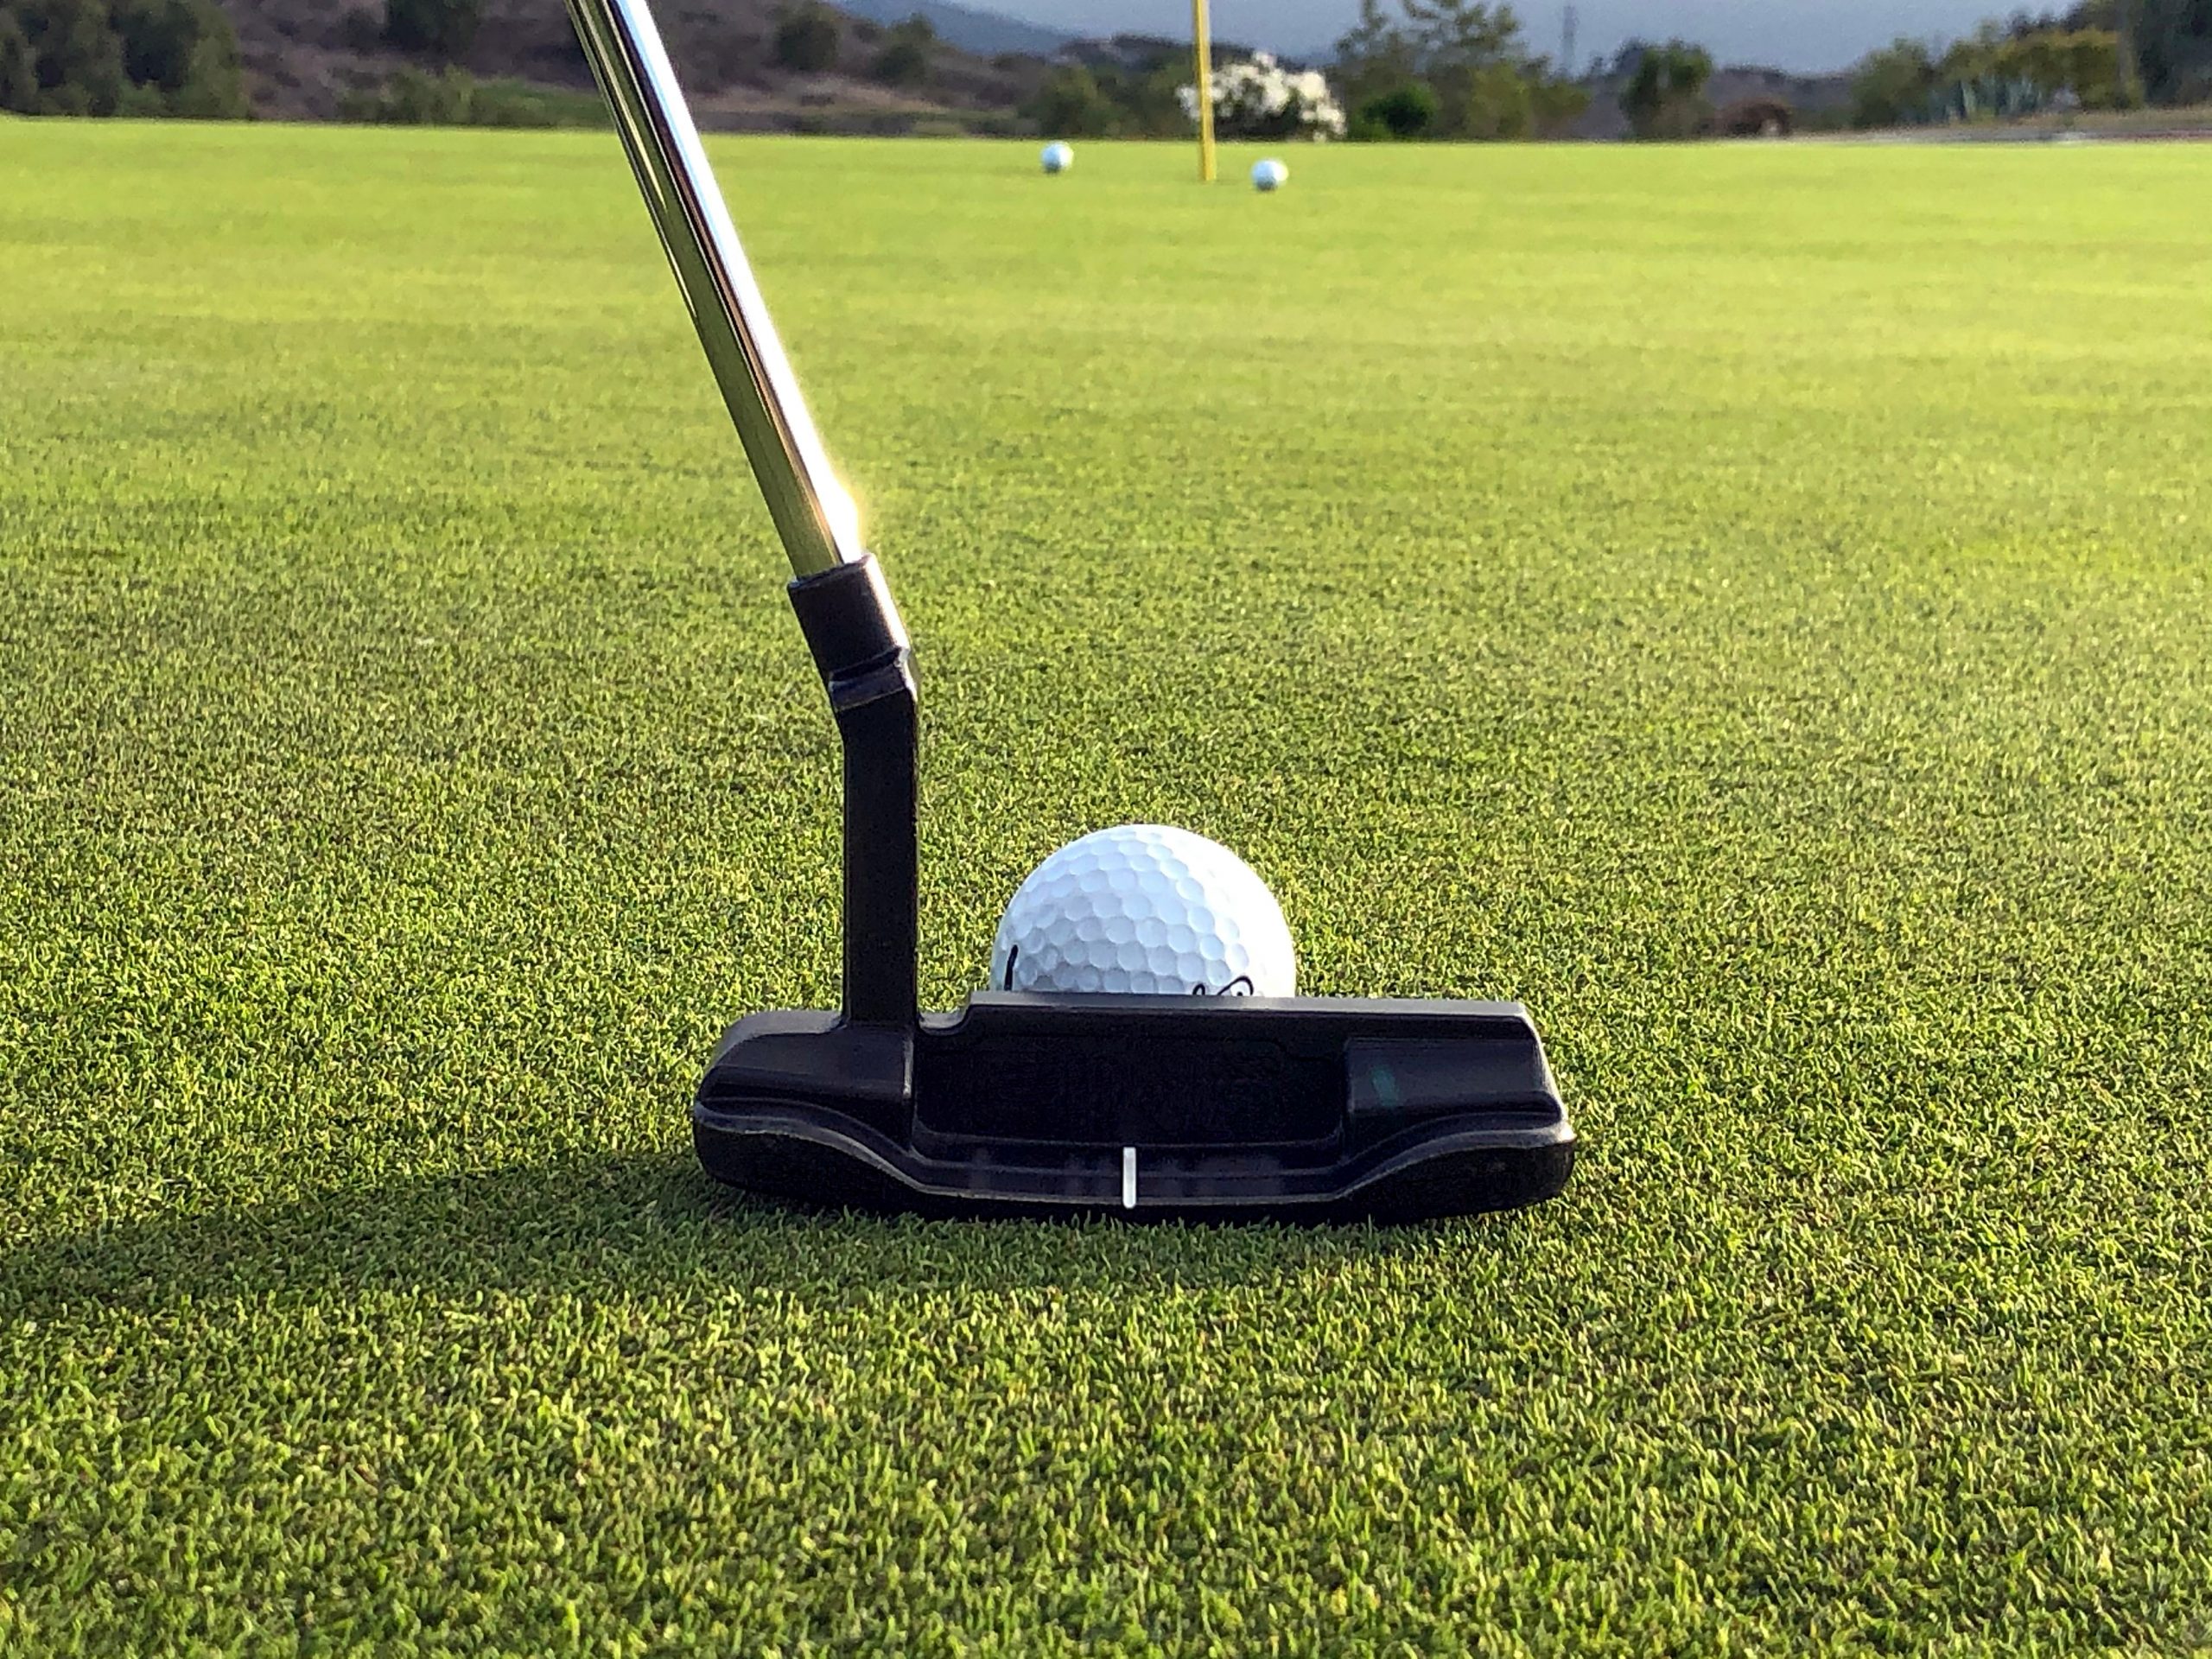 Golf Putter with Golf Pin In Background